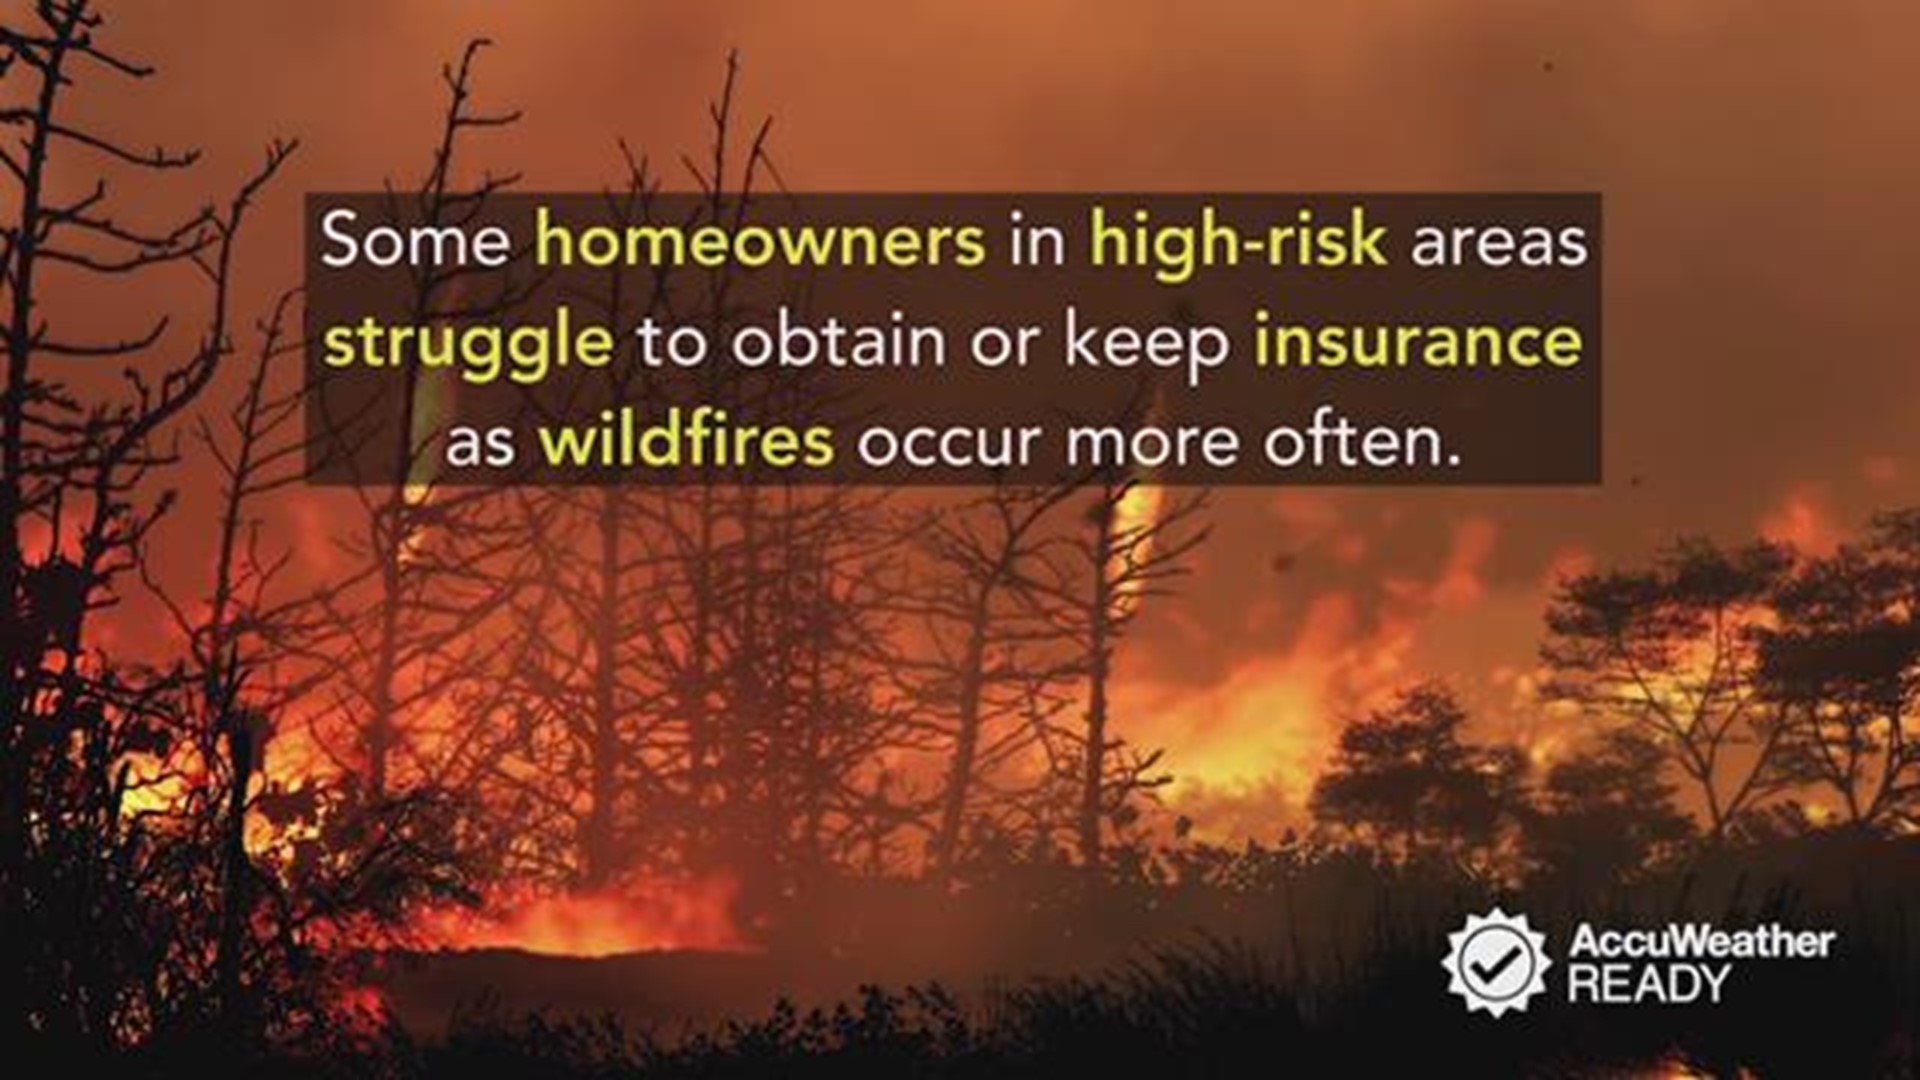 Some homeowners in high-risk areas struggle to obtain or keep insurance as wildfires occur more often.